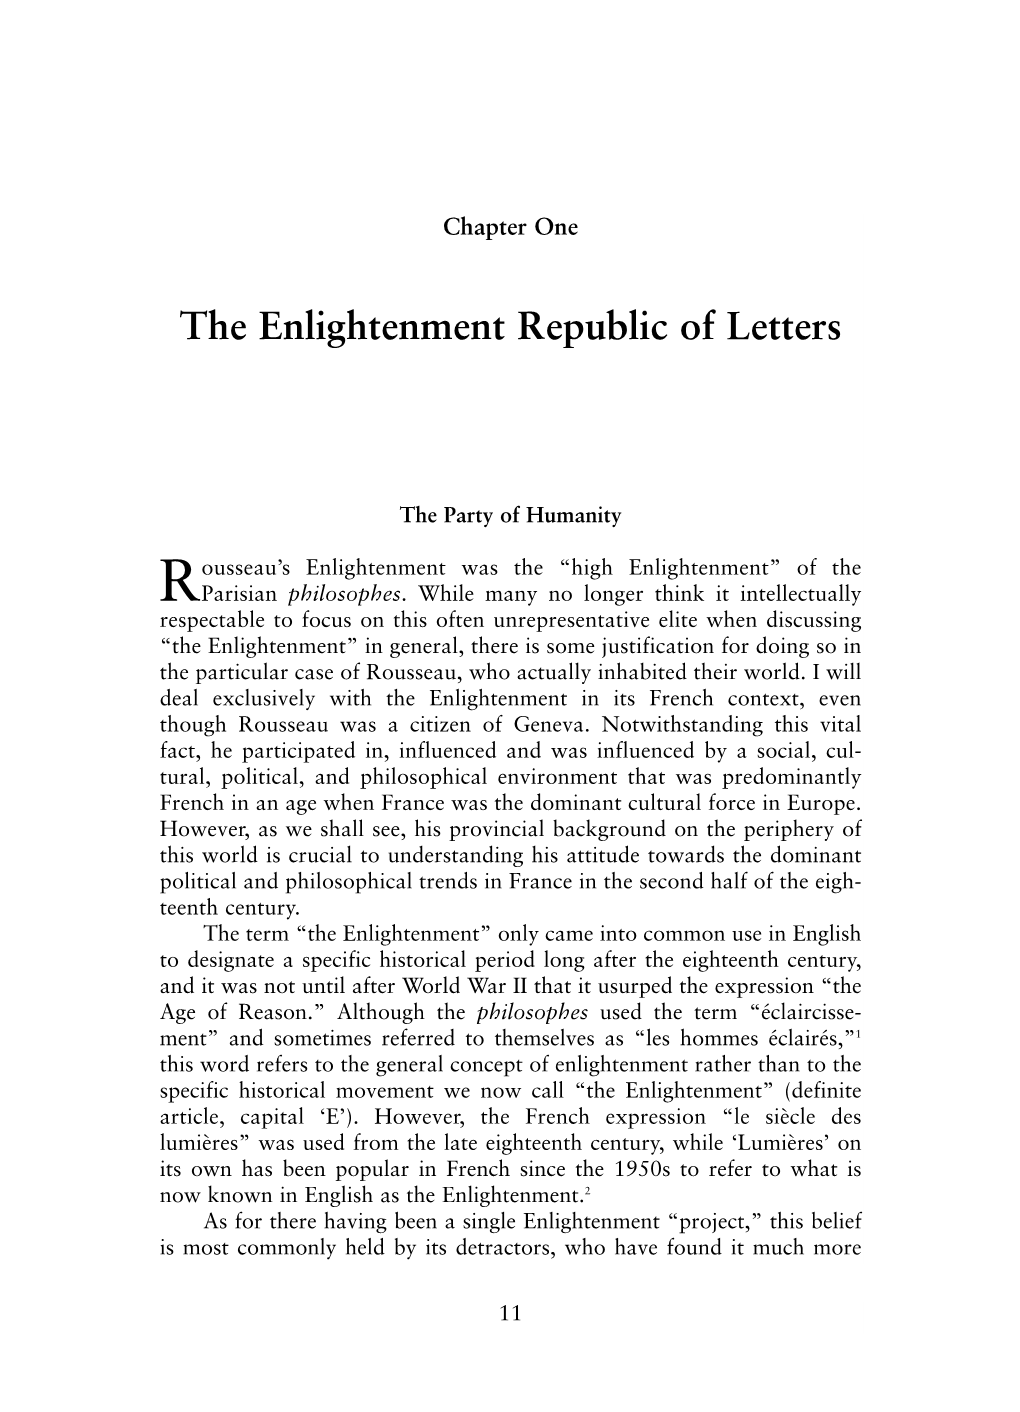 The Enlightenment Republic of Letters